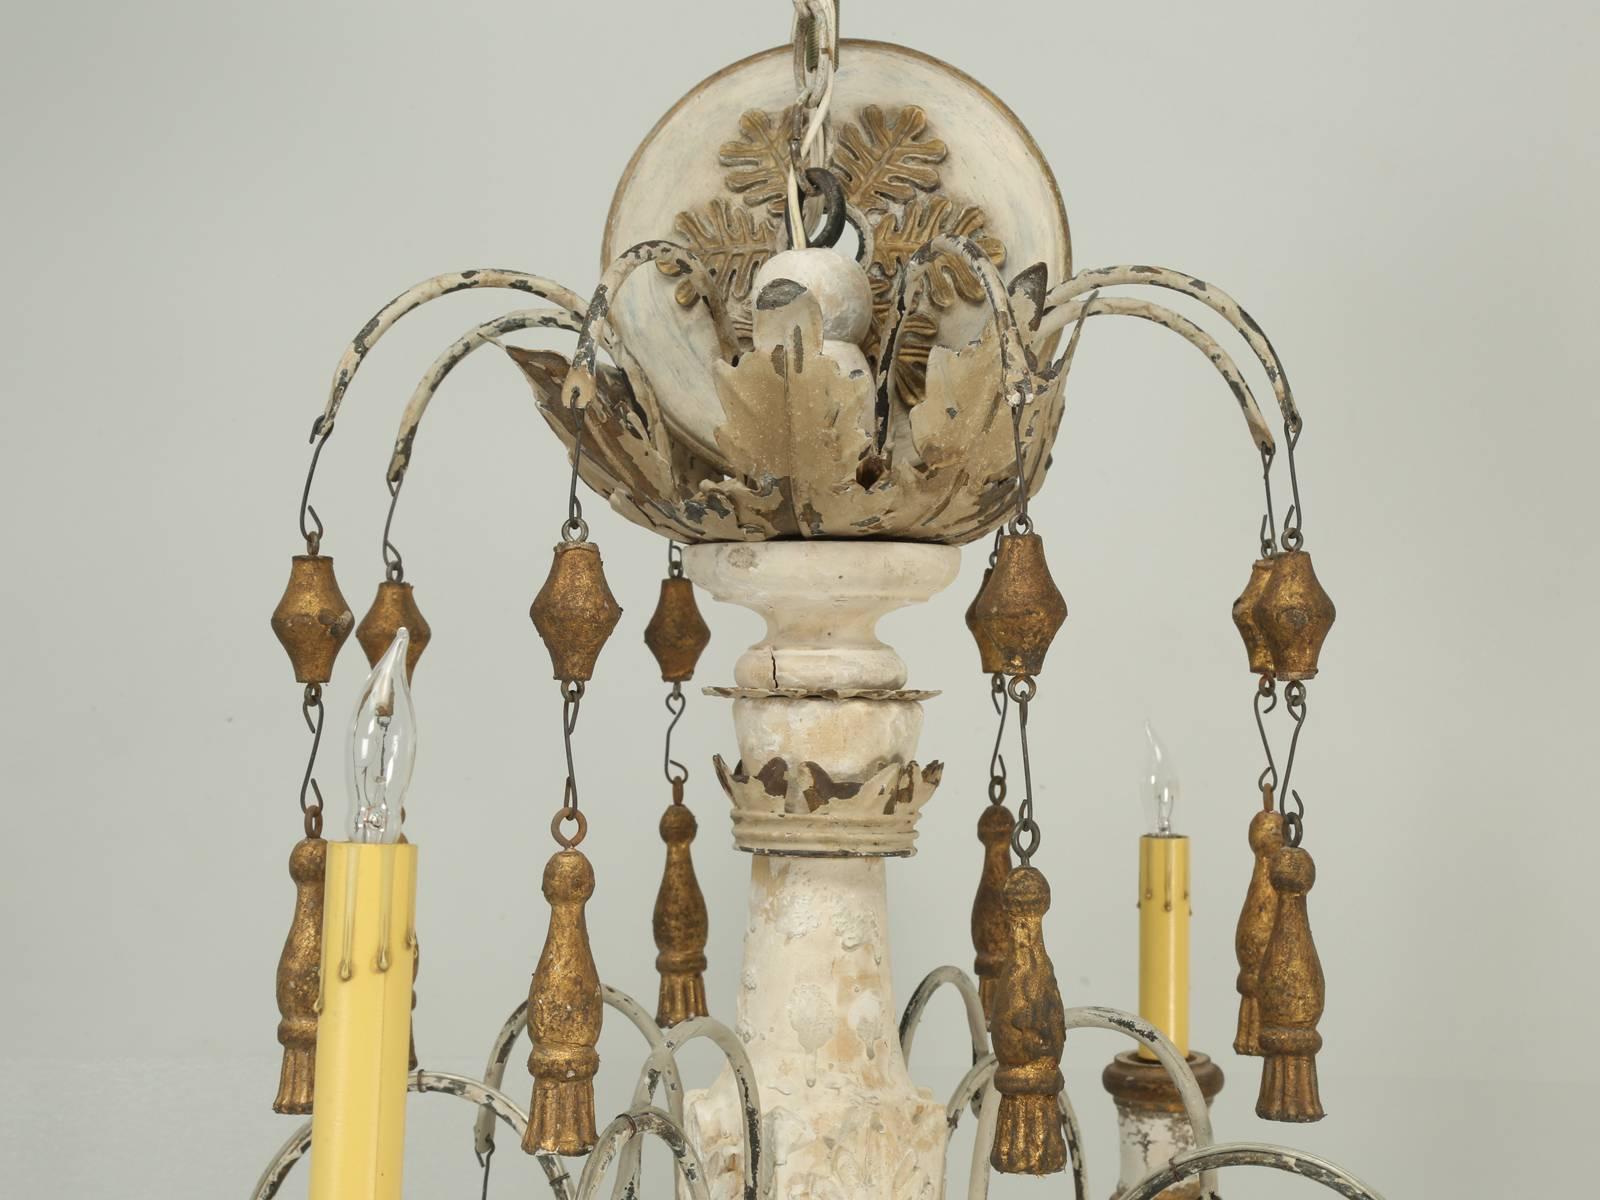 Huge Italian wooden chandelier and although when purchasing one of the Italian chandeliers in Europe, they will swear that they are antique, I prefer to think they are made from antique pieces or artifacts and assembled into a beautiful Italian